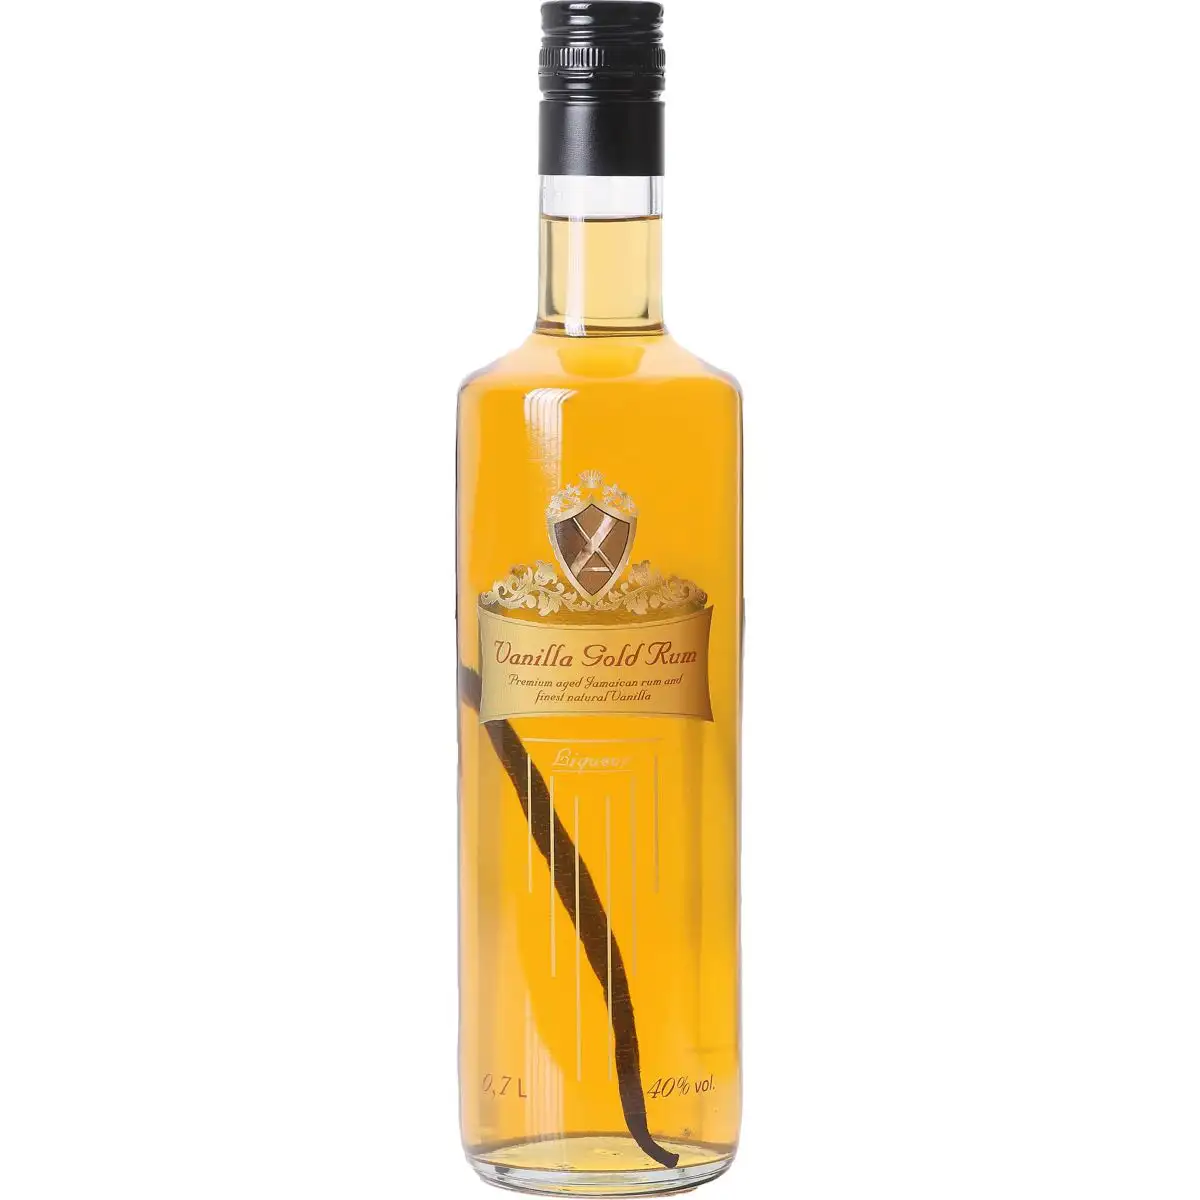 Image of the front of the bottle of the rum Vanilla Gold Rum